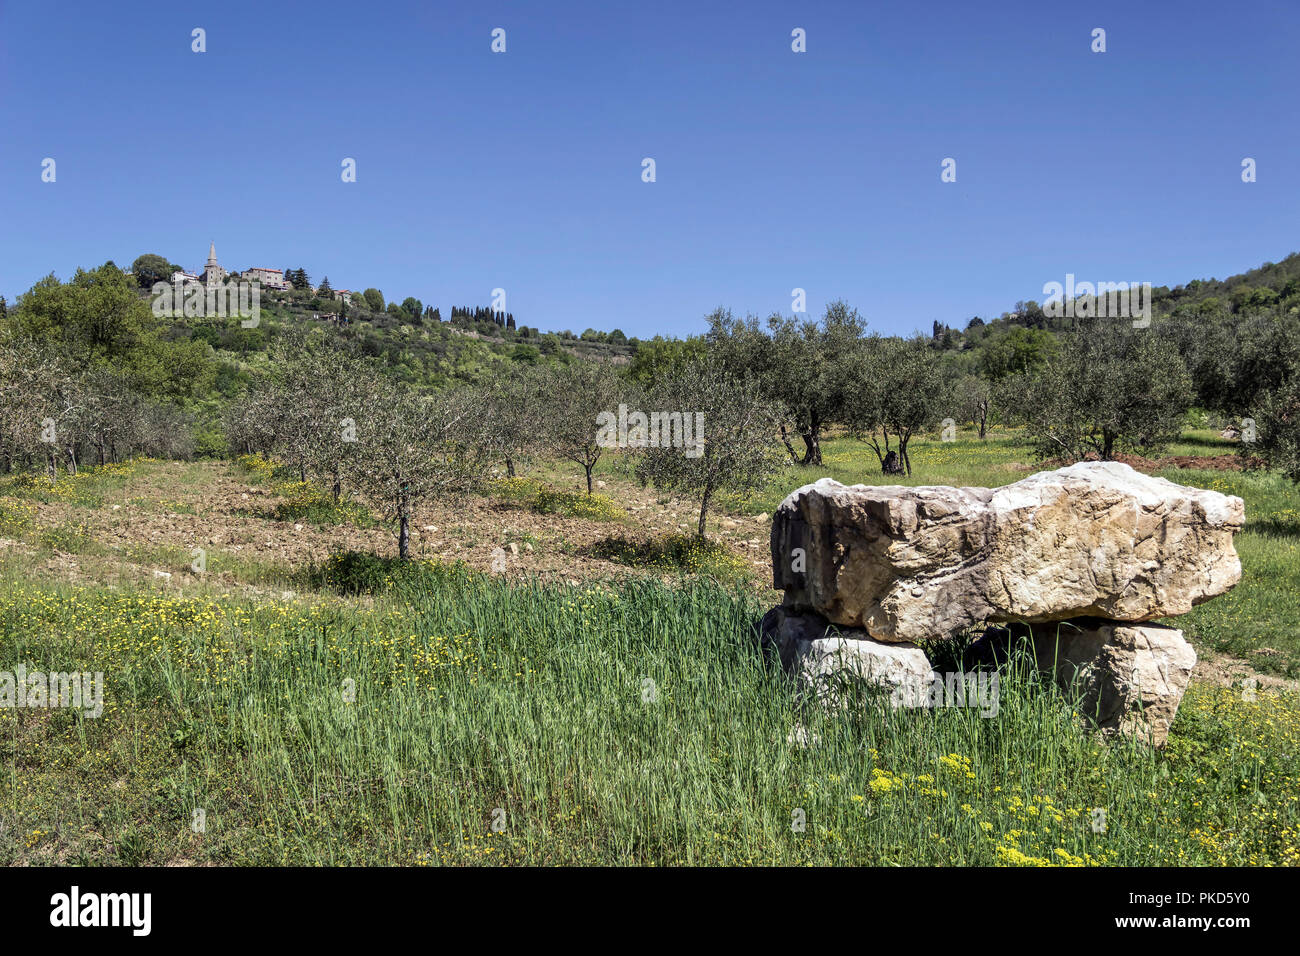 Central Istria (Istria), Croatia - Ancient stone structure placed in the one of olive groves that surrounds the medieval town of Grisignana (Groznjan) Stock Photo